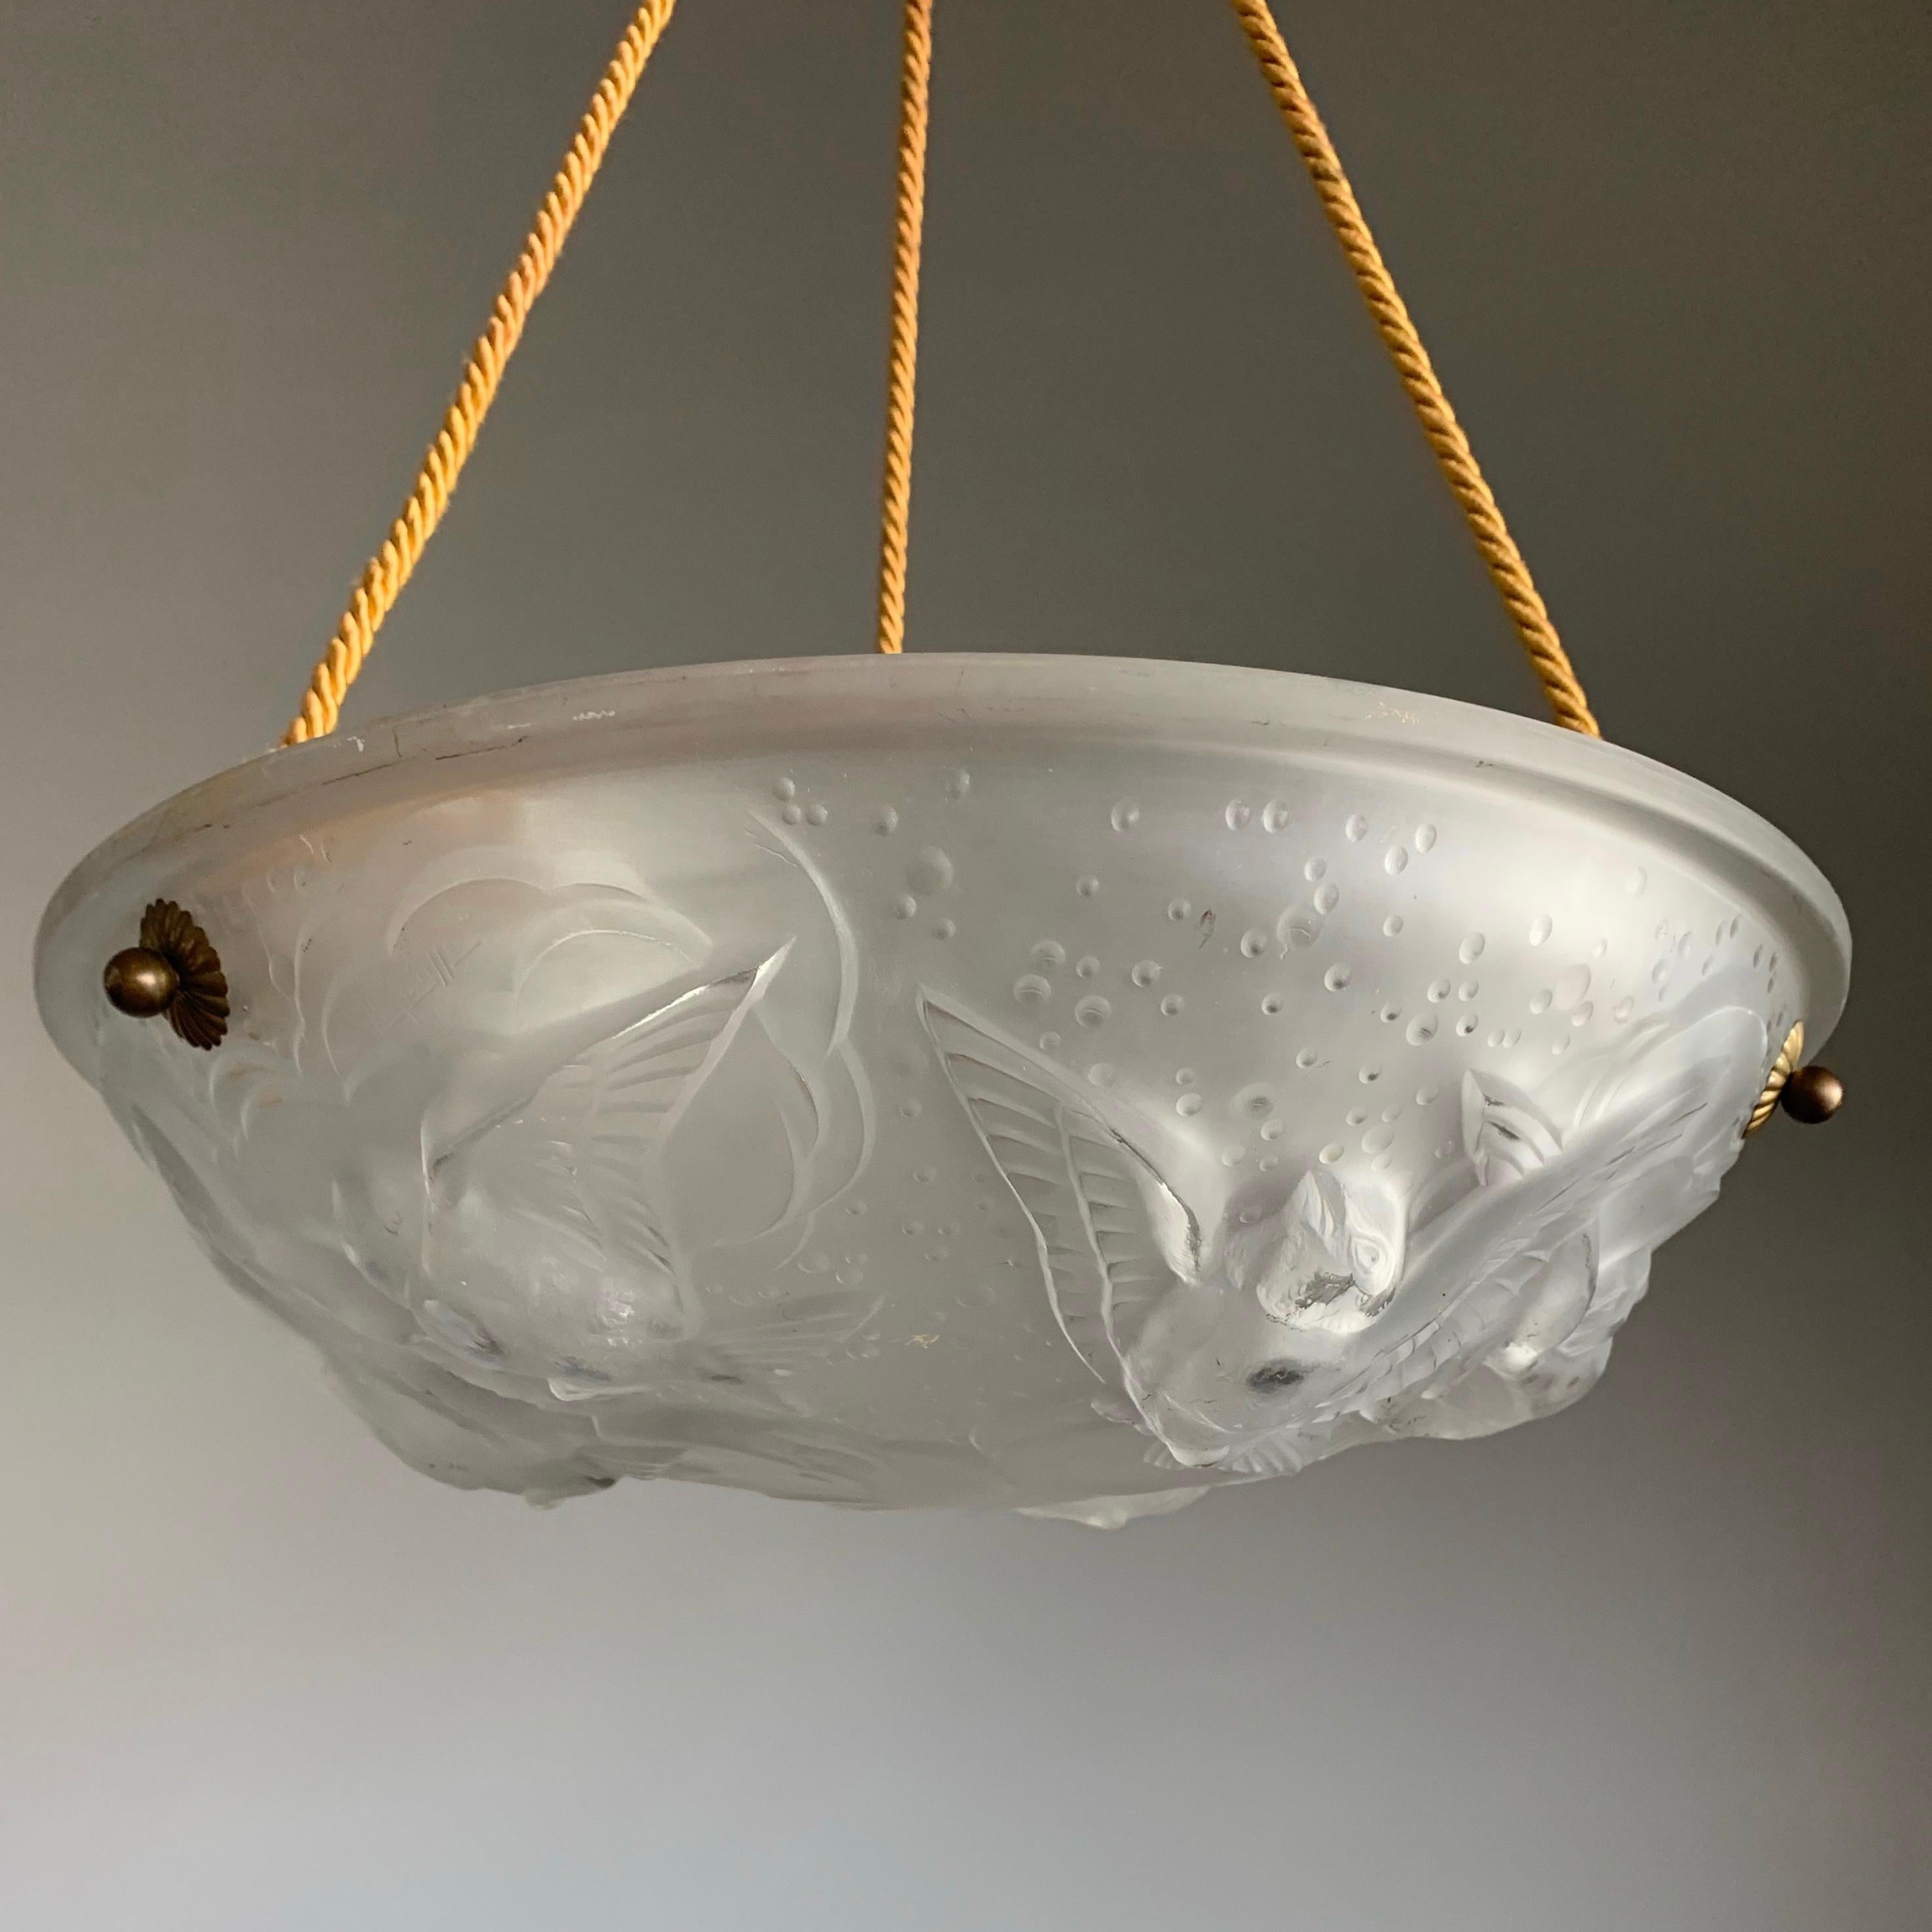 Hand-Crafted Stylish Art Deco Chandelier, Frosted Glass with Flying House Sparrows by Muller For Sale